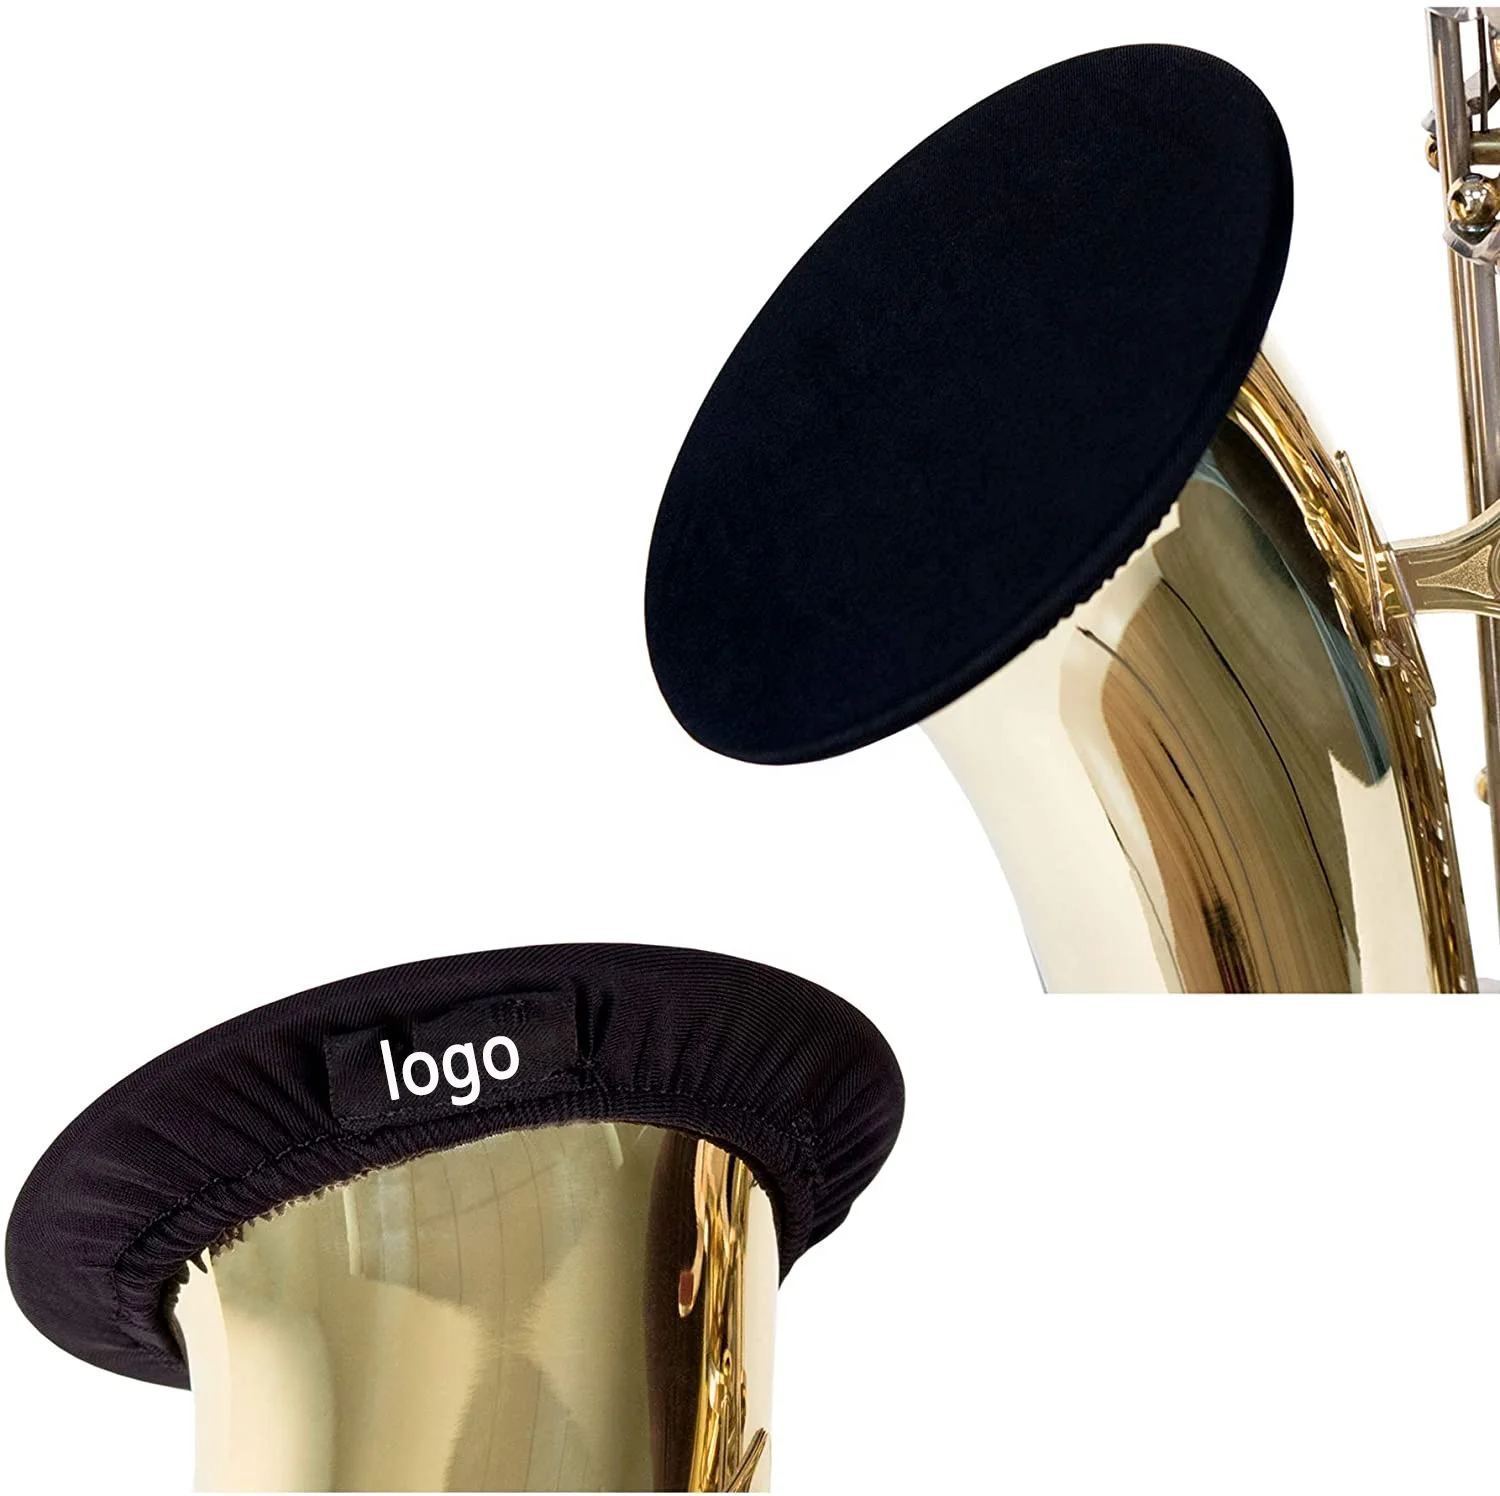 

Protec Instrument , Alto, Bass Clarinet, Soprano Saxophone, Bell Trumpet cover, As picture